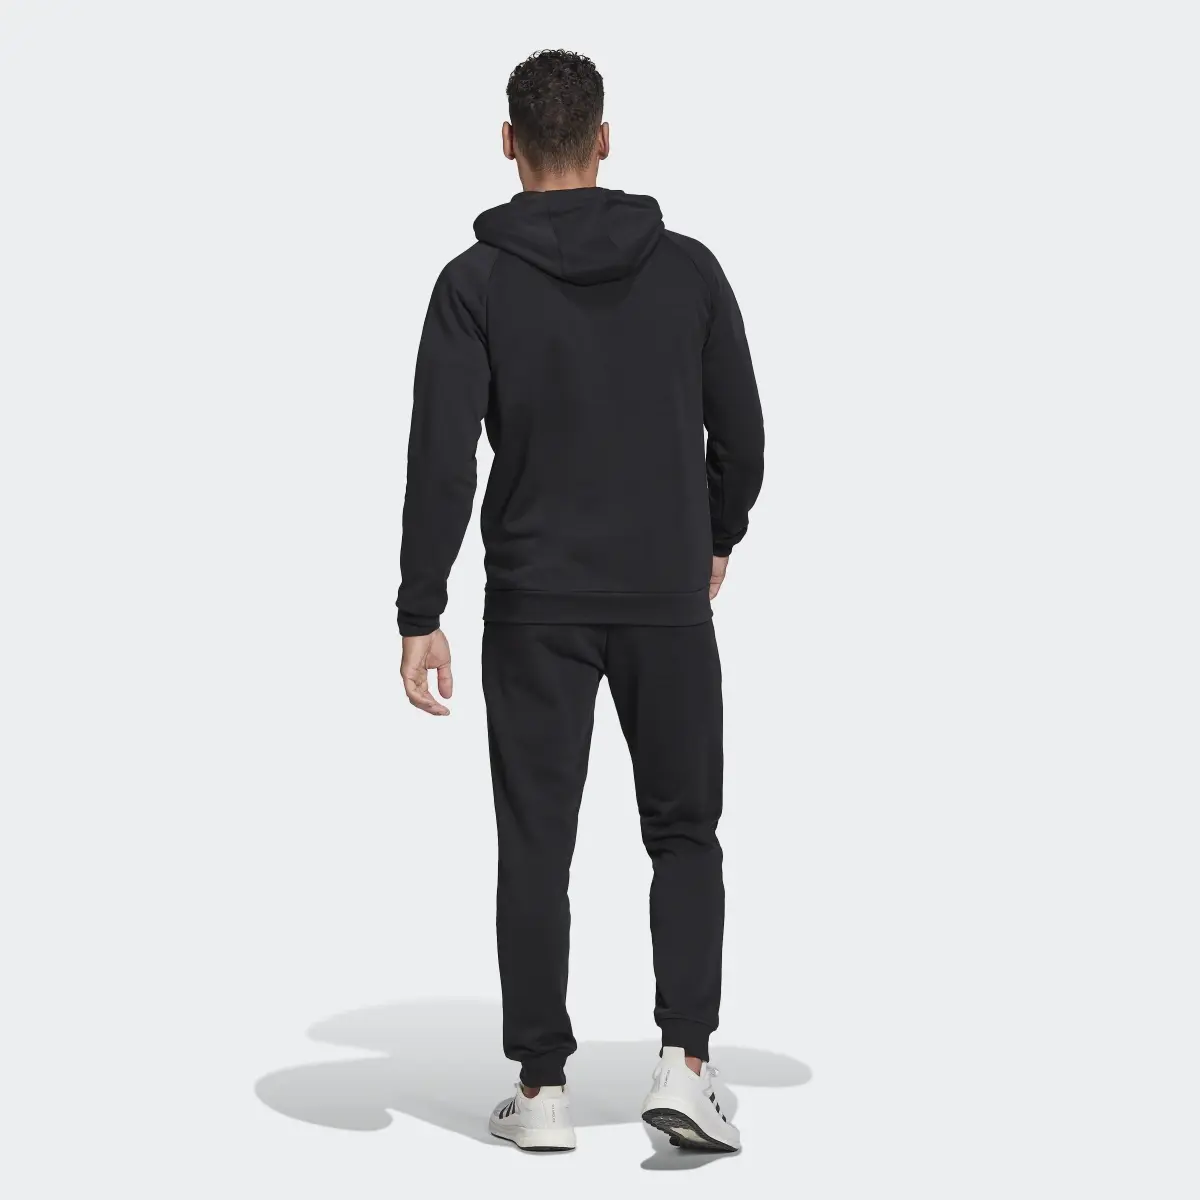 Adidas Cotton Piping Track Suit. 3